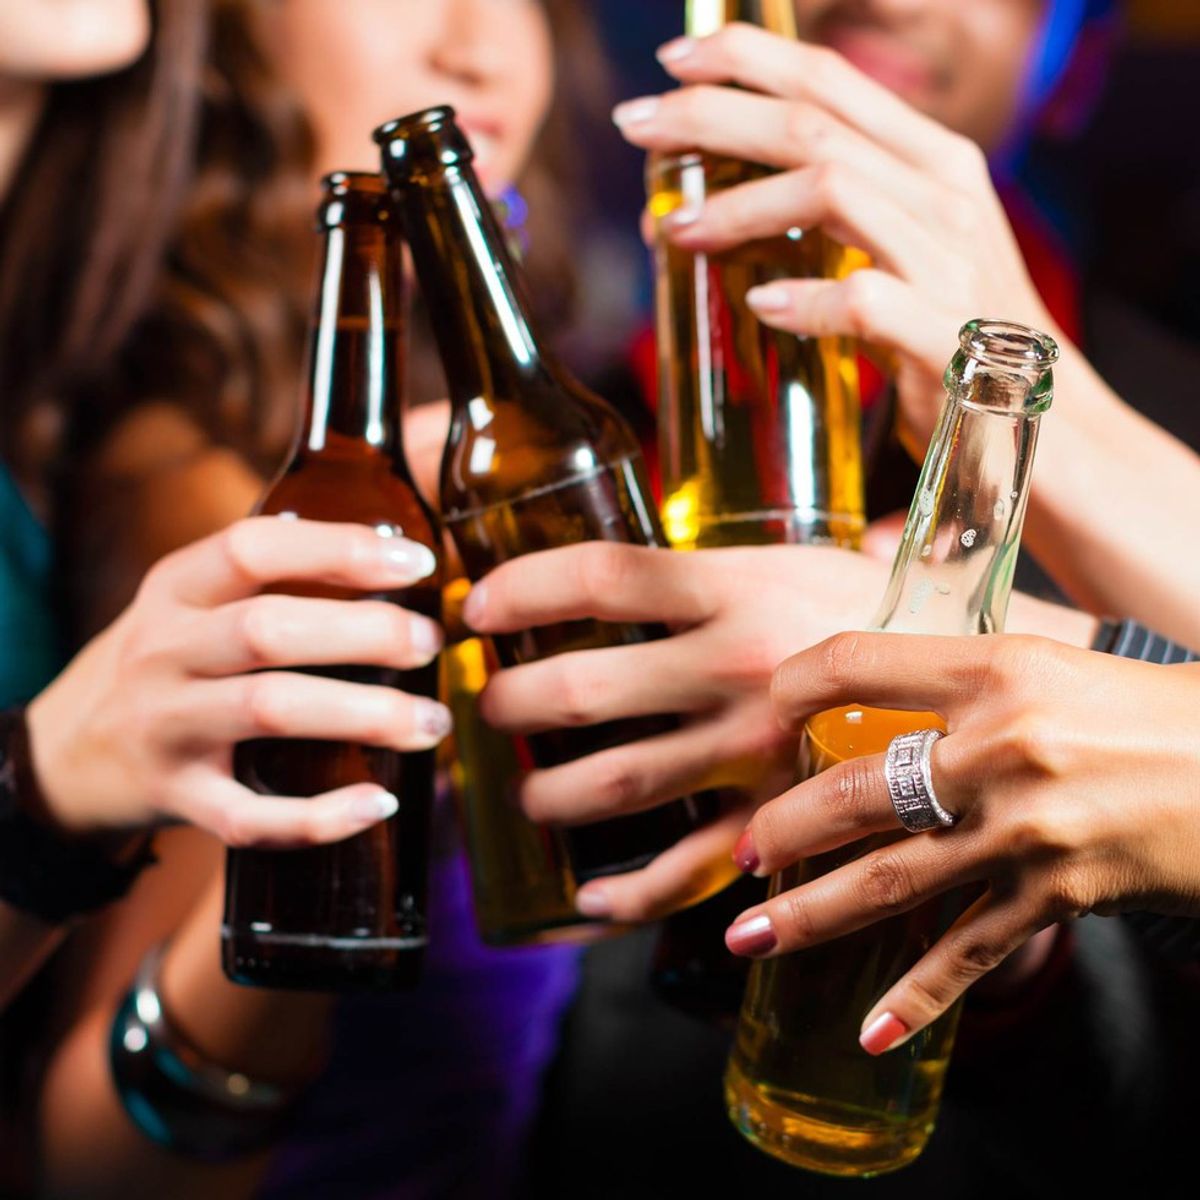 ​Should the U.S. lower the drinking age to 18?